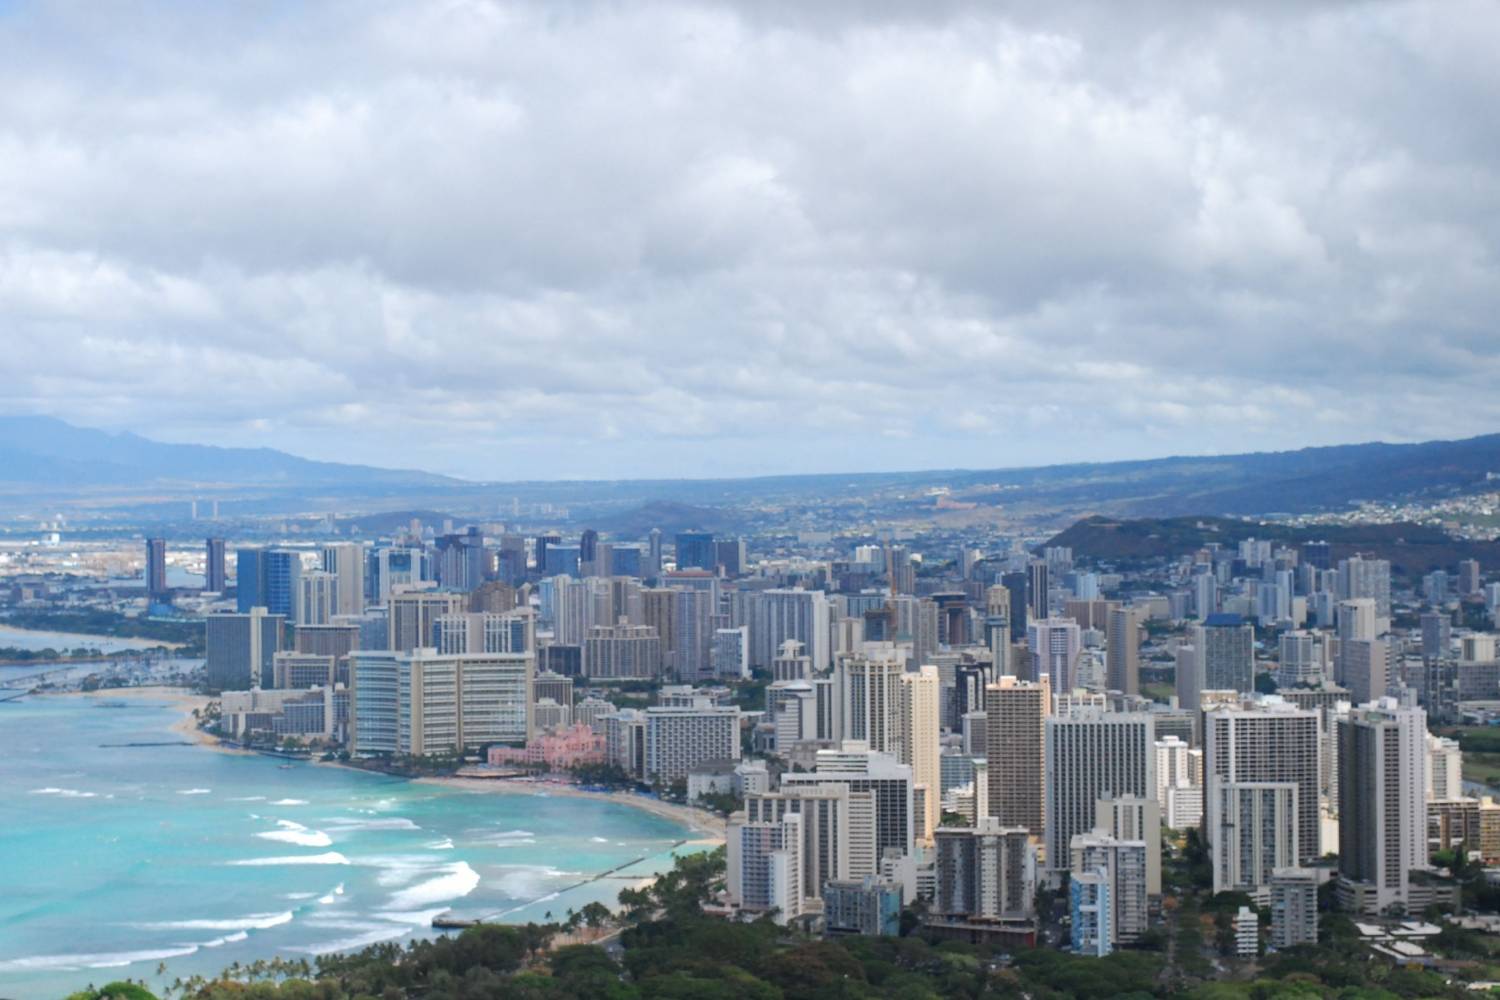 Waikiki as seen from the top of Diamond Head - Take a Chef